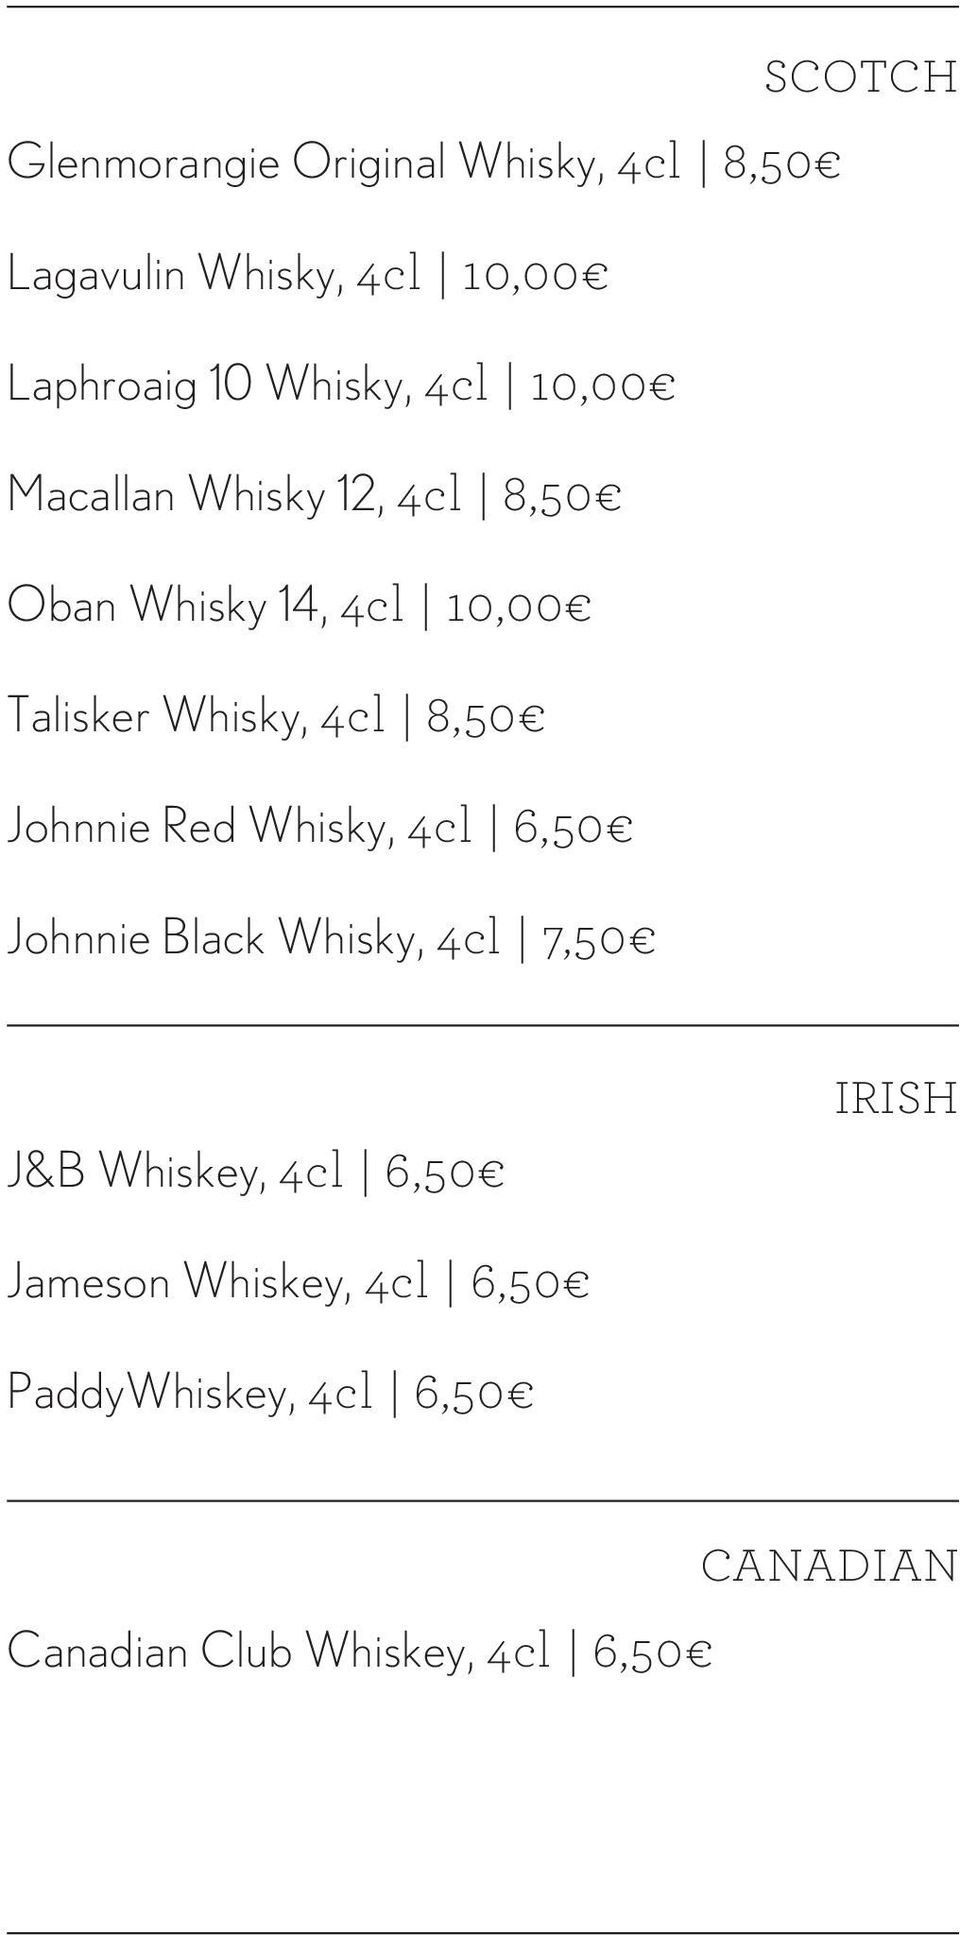 4cl 8,50 Johnnie Red Whisky, 4cl 6,50 Johnnie Black Whisky, 4cl 7,50 J&B Whiskey, 4cl 6,50